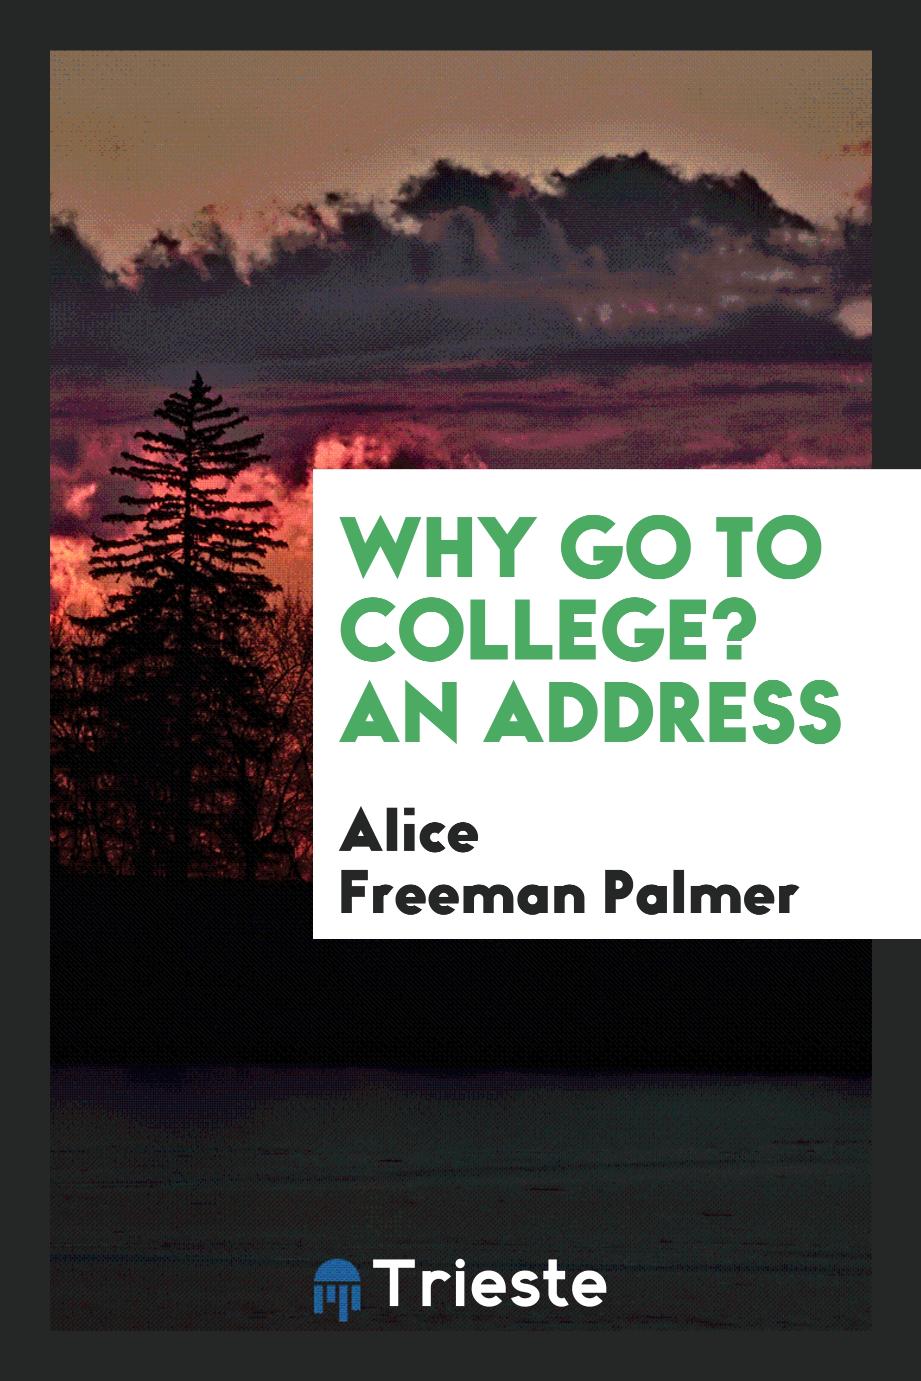 Why go to college? An address